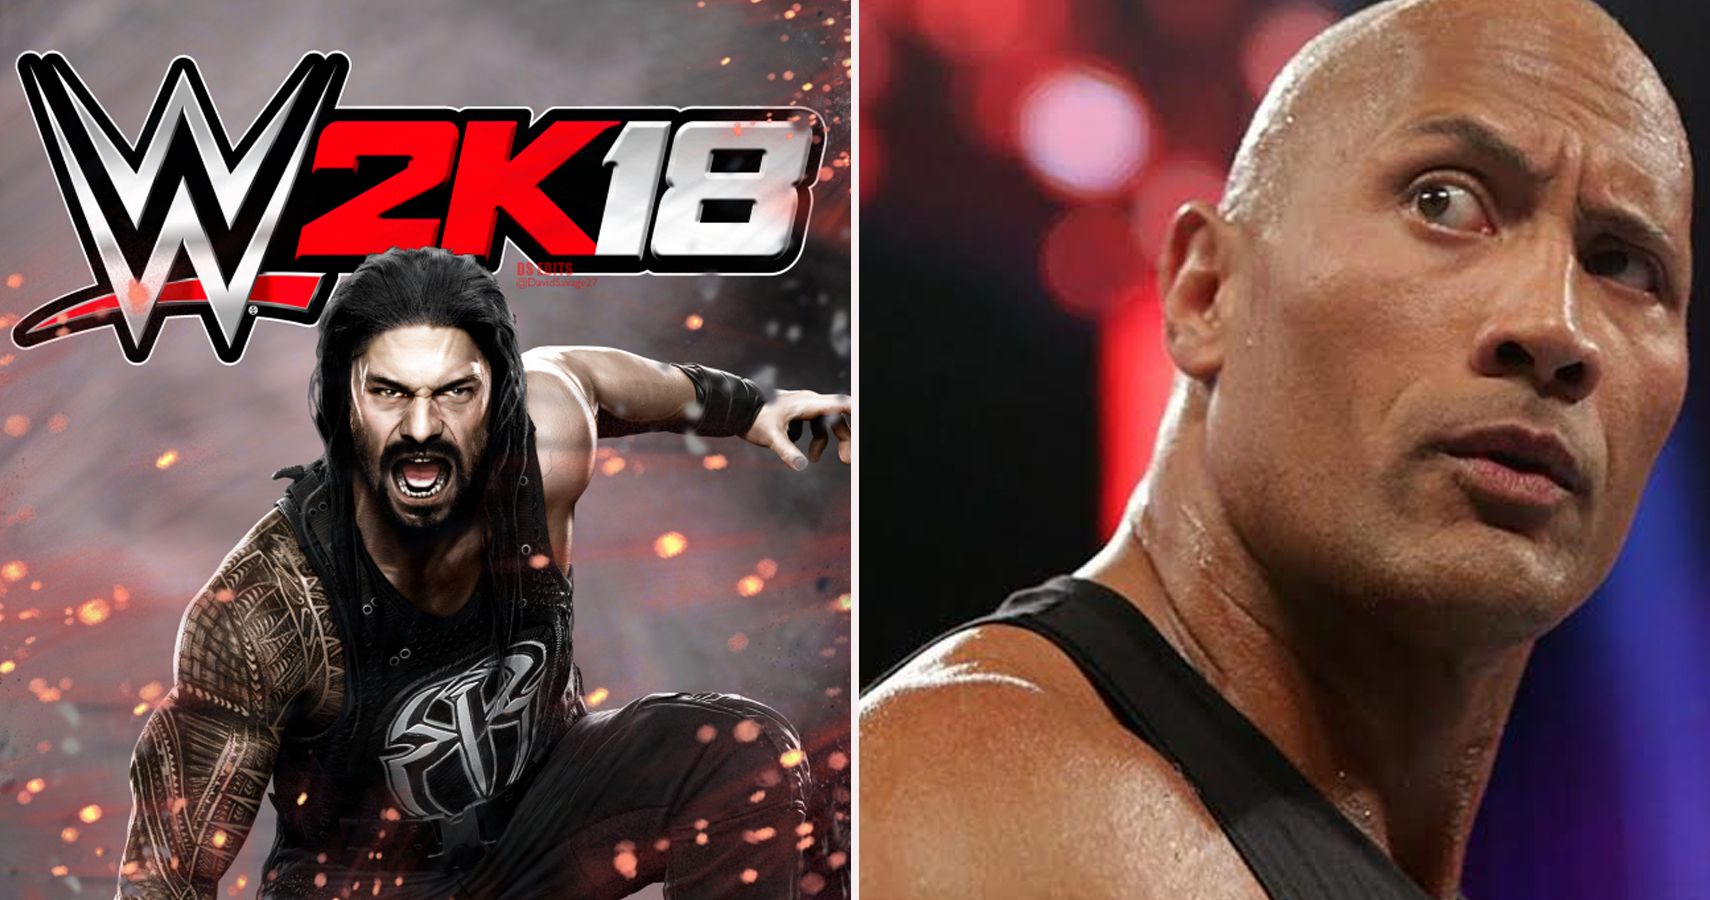 15 Reasons WWE 2K18 Is Going To SUCK